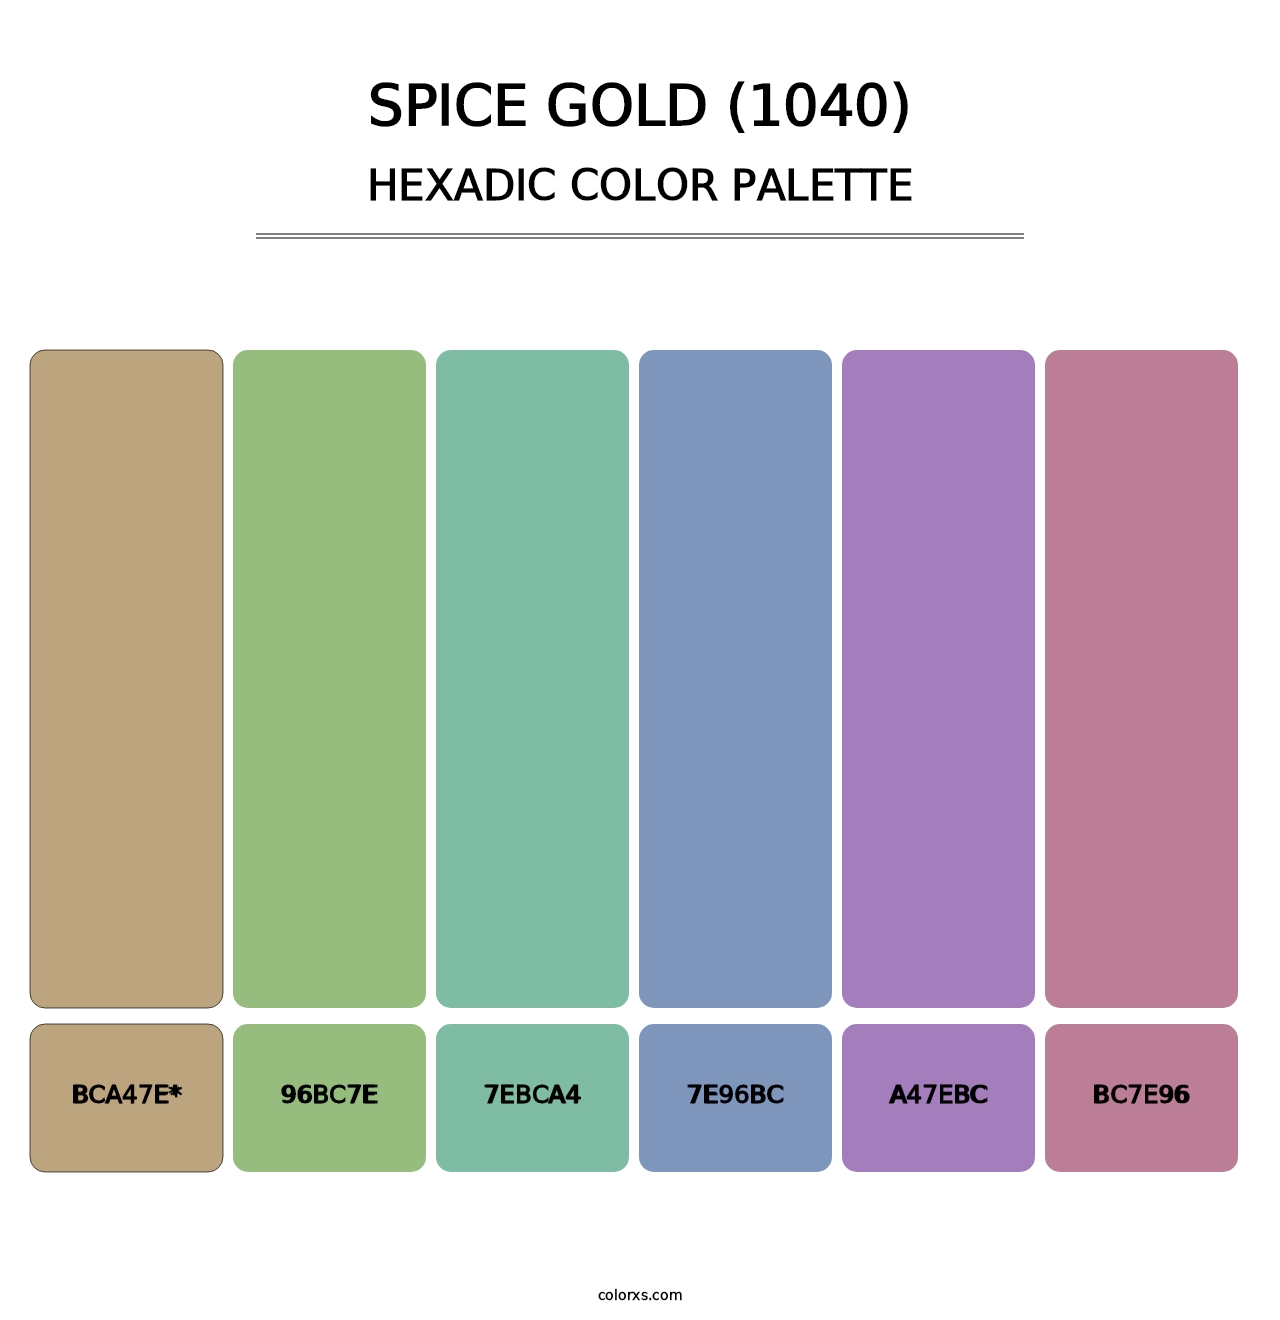 Spice Gold (1040) - Hexadic Color Palette